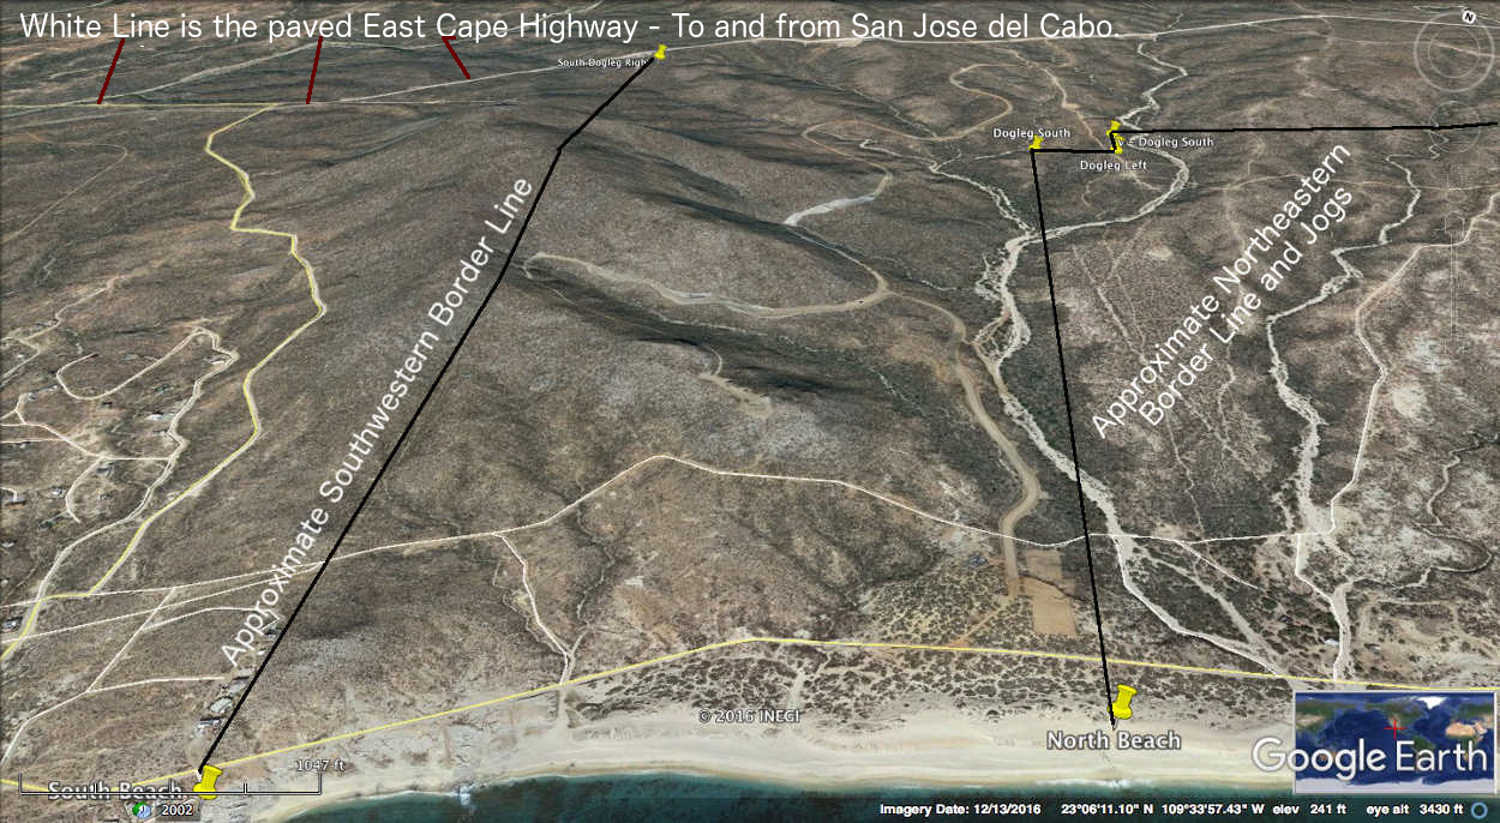 Roads are under construction now.  In six months, a rough road has been cut through changes in elevations from the newly paved East Cape road to nearly the beach.  This image is taken from Google Earth and it shows how much has been done through 12-13-2016.  Tap the image to expand - tap your browser's back arrow to return to the page.